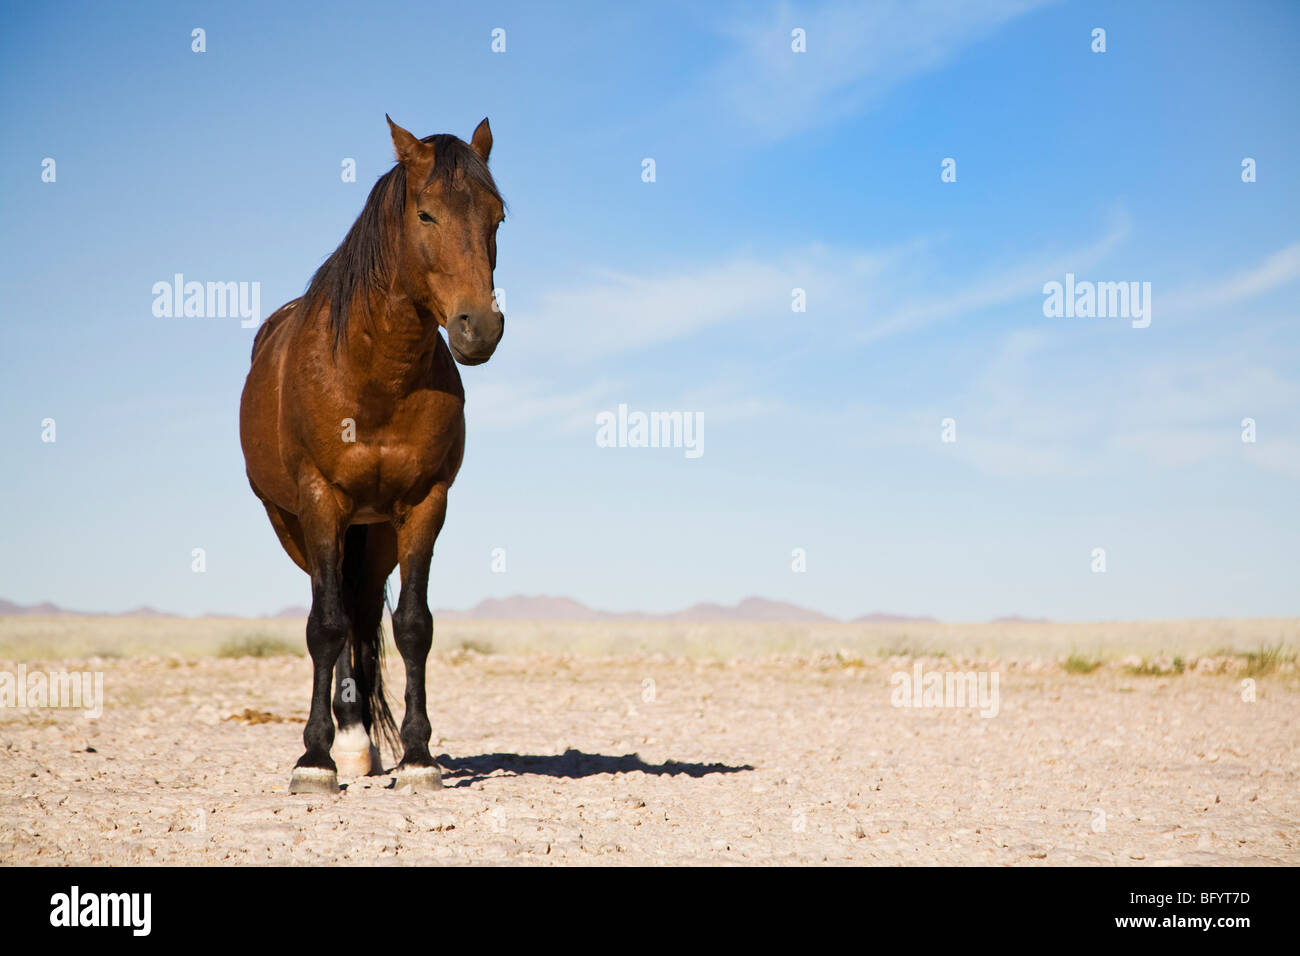 Wild horse, horse of the former German Schutztruppe protection troops in Namibia, Africa Stock Photo